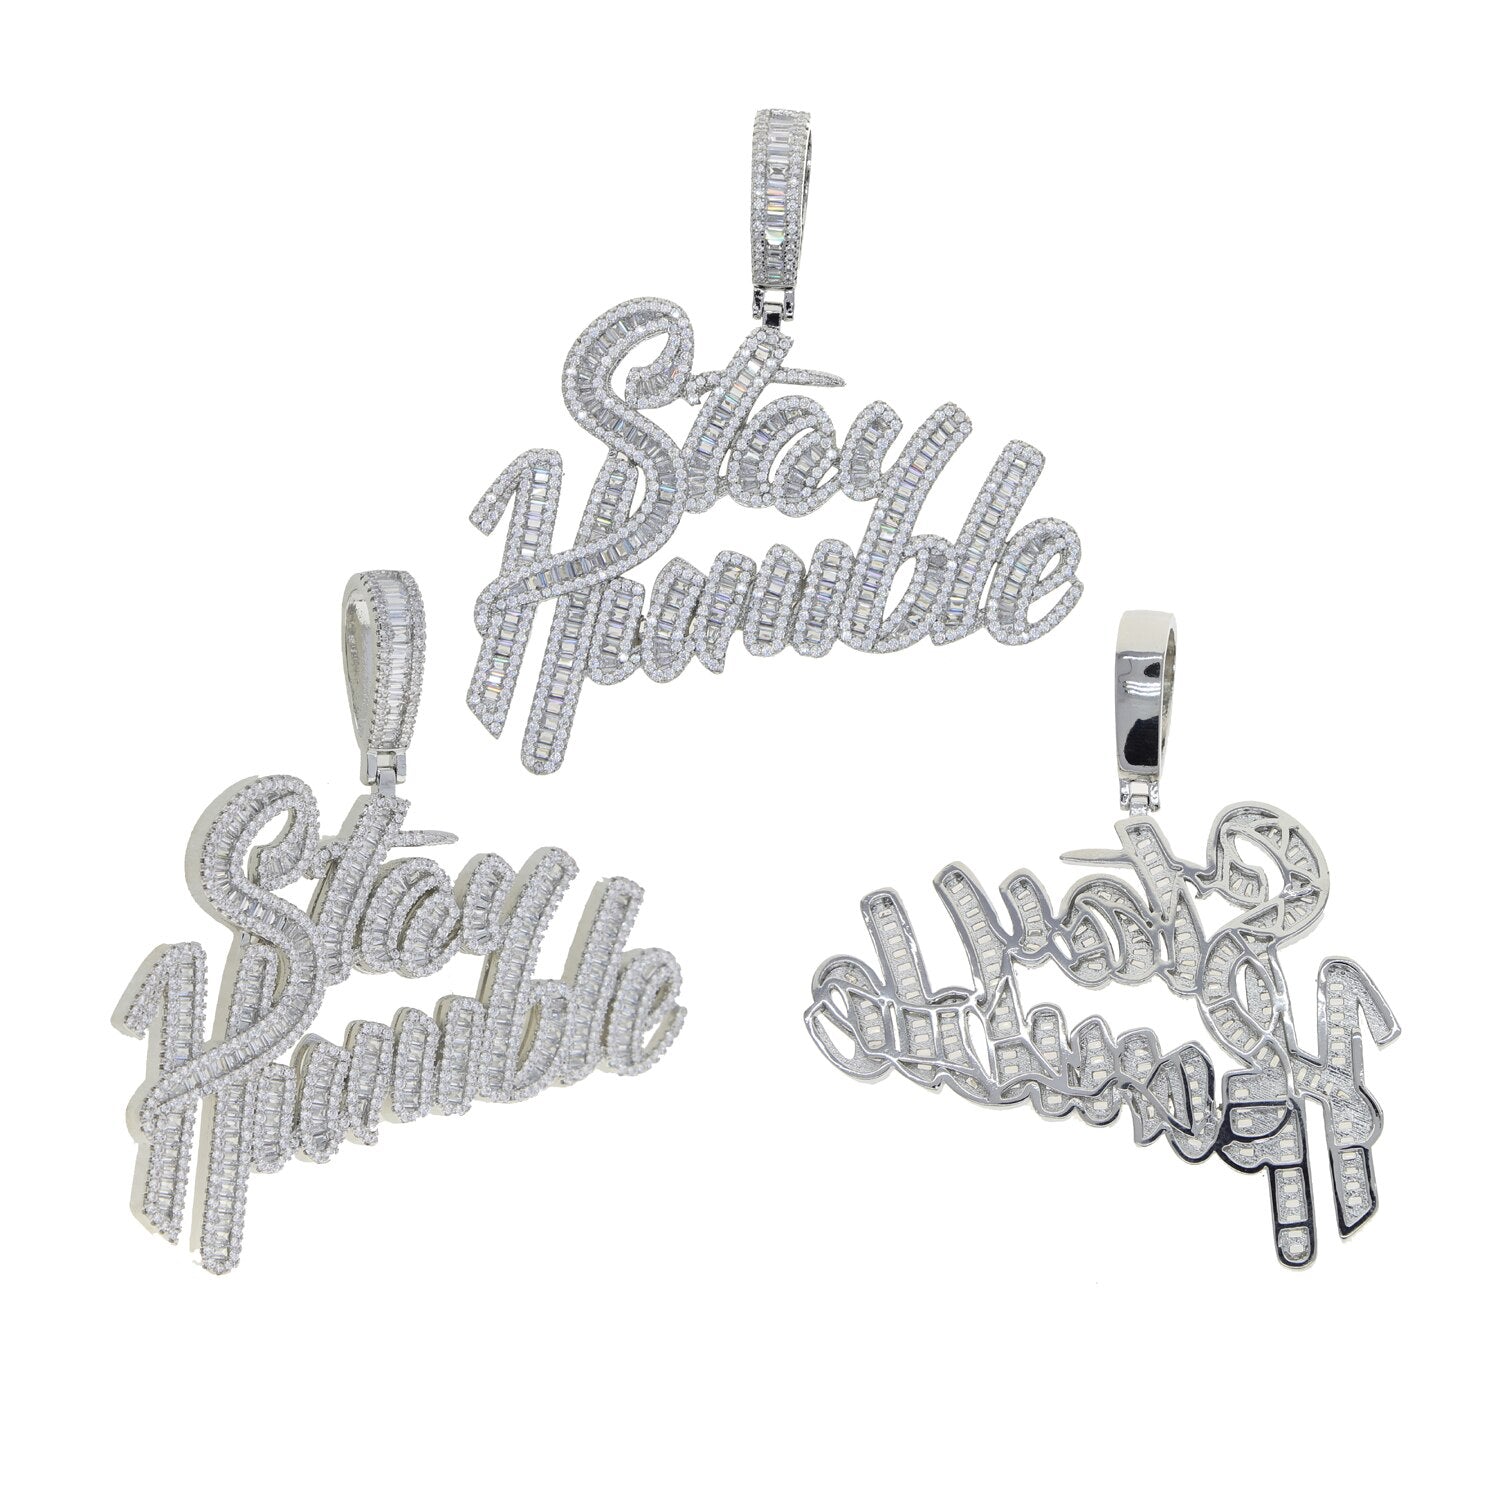 New Arrived Bling Iced Out Stay Humble Letters Pendants Paved 5A Cubic Zirconia Necklaces For Men Hip Hop Rapper CZ Jewelry - Bekro's ART